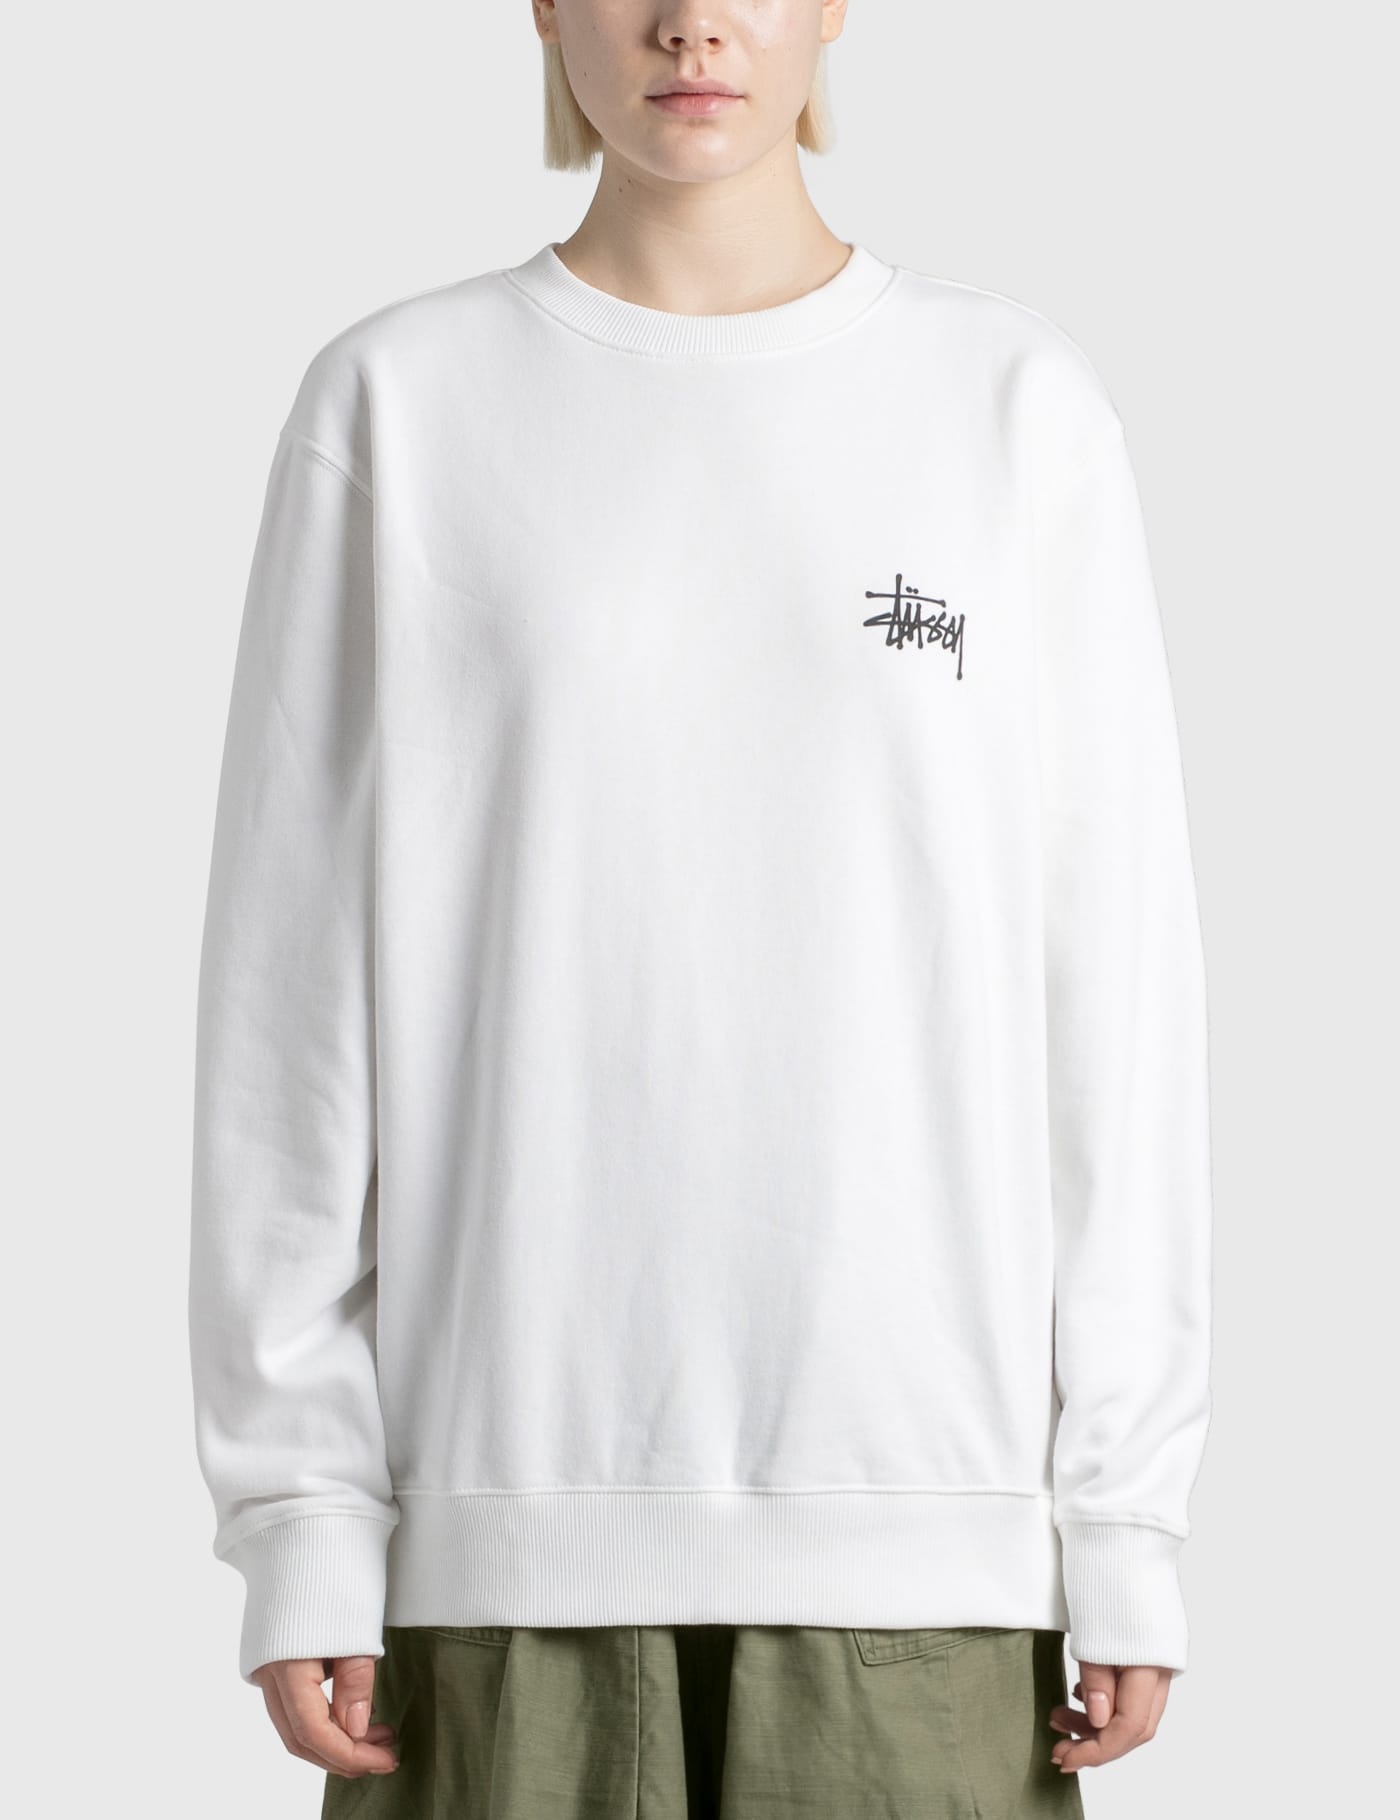 Stüssy - Basic Stussy Crew | HBX - Globally Curated Fashion and 